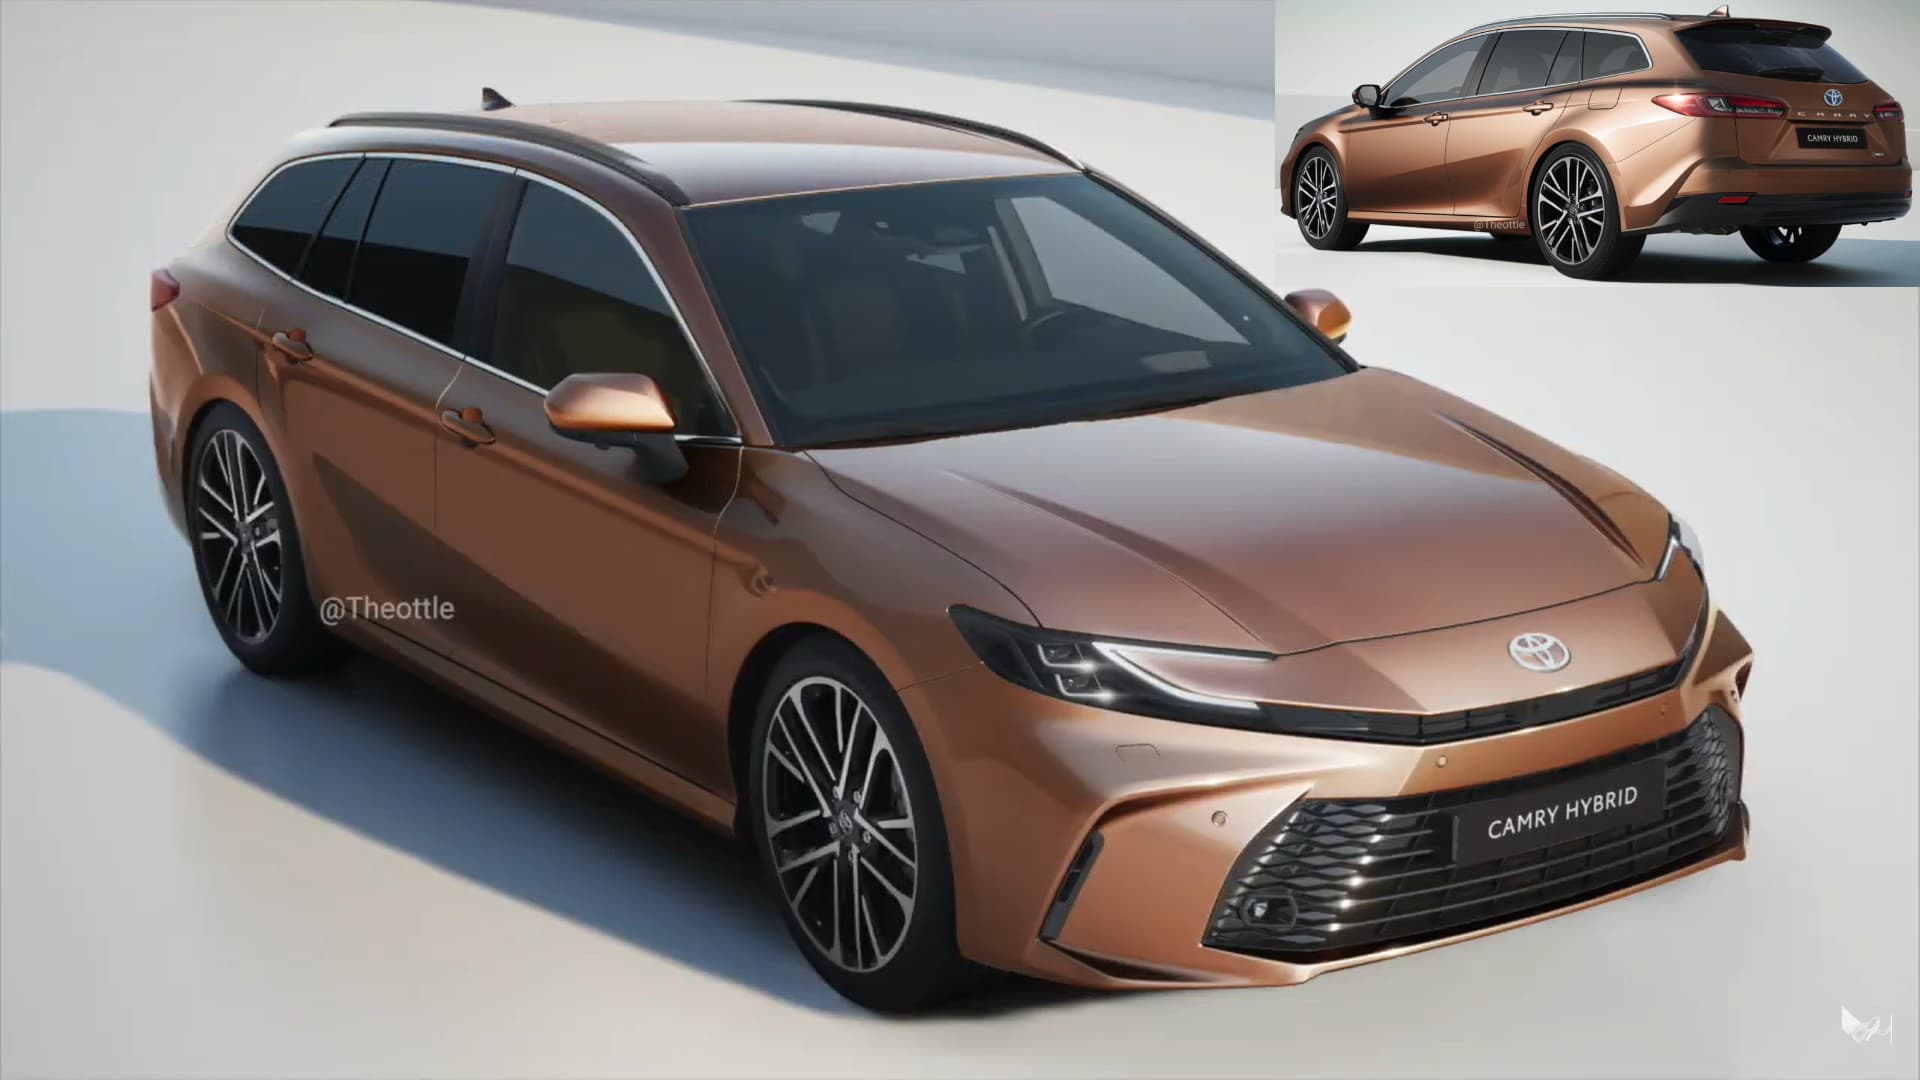 2025 toyota camry welcomes back the station wagon option at least in fantasy land 228164 1